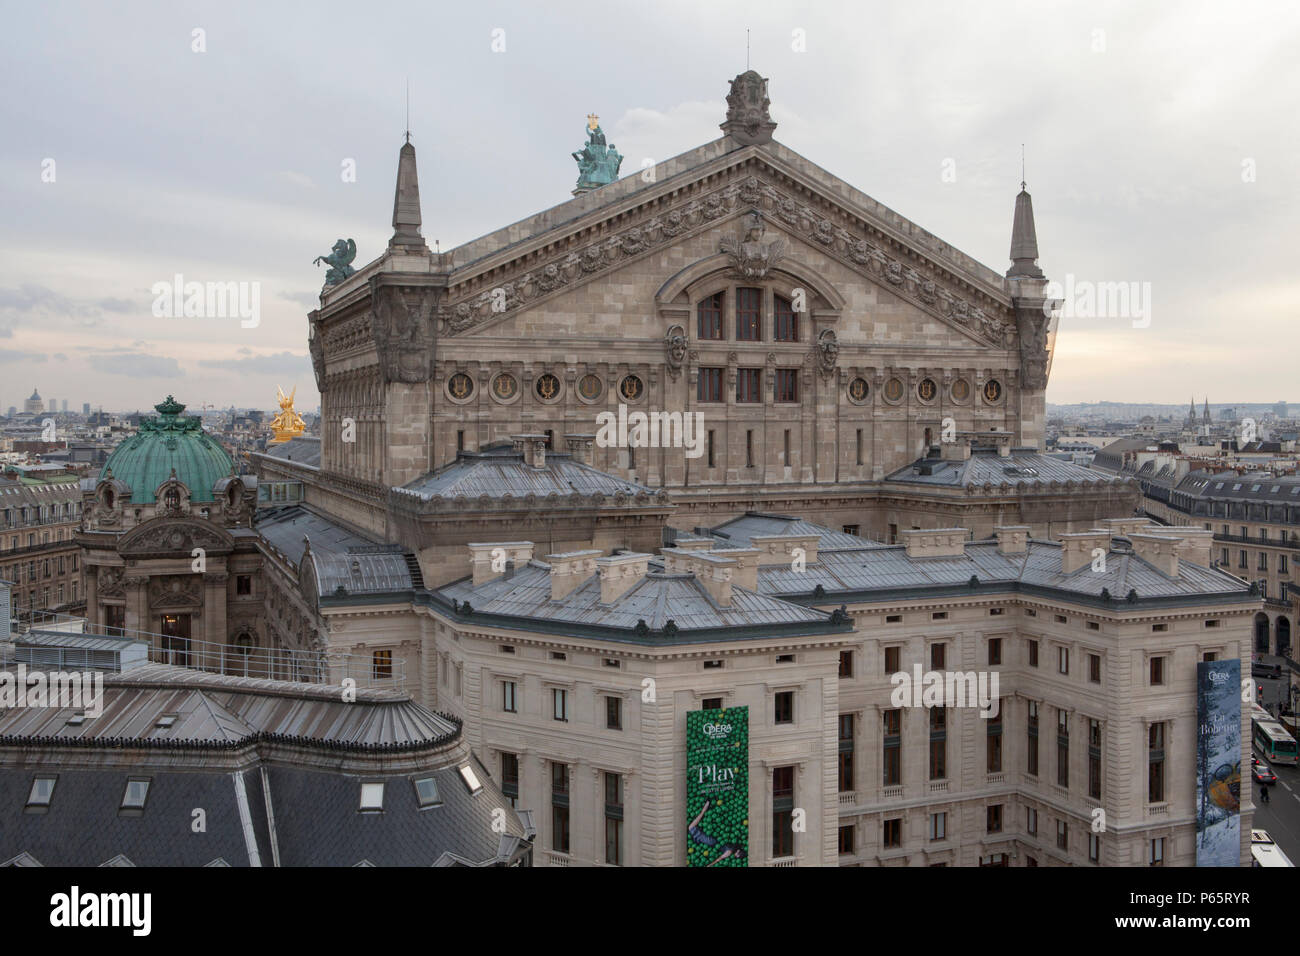 Rooftop view of the Palais Garnier Opera House in Paris France Stock Photo